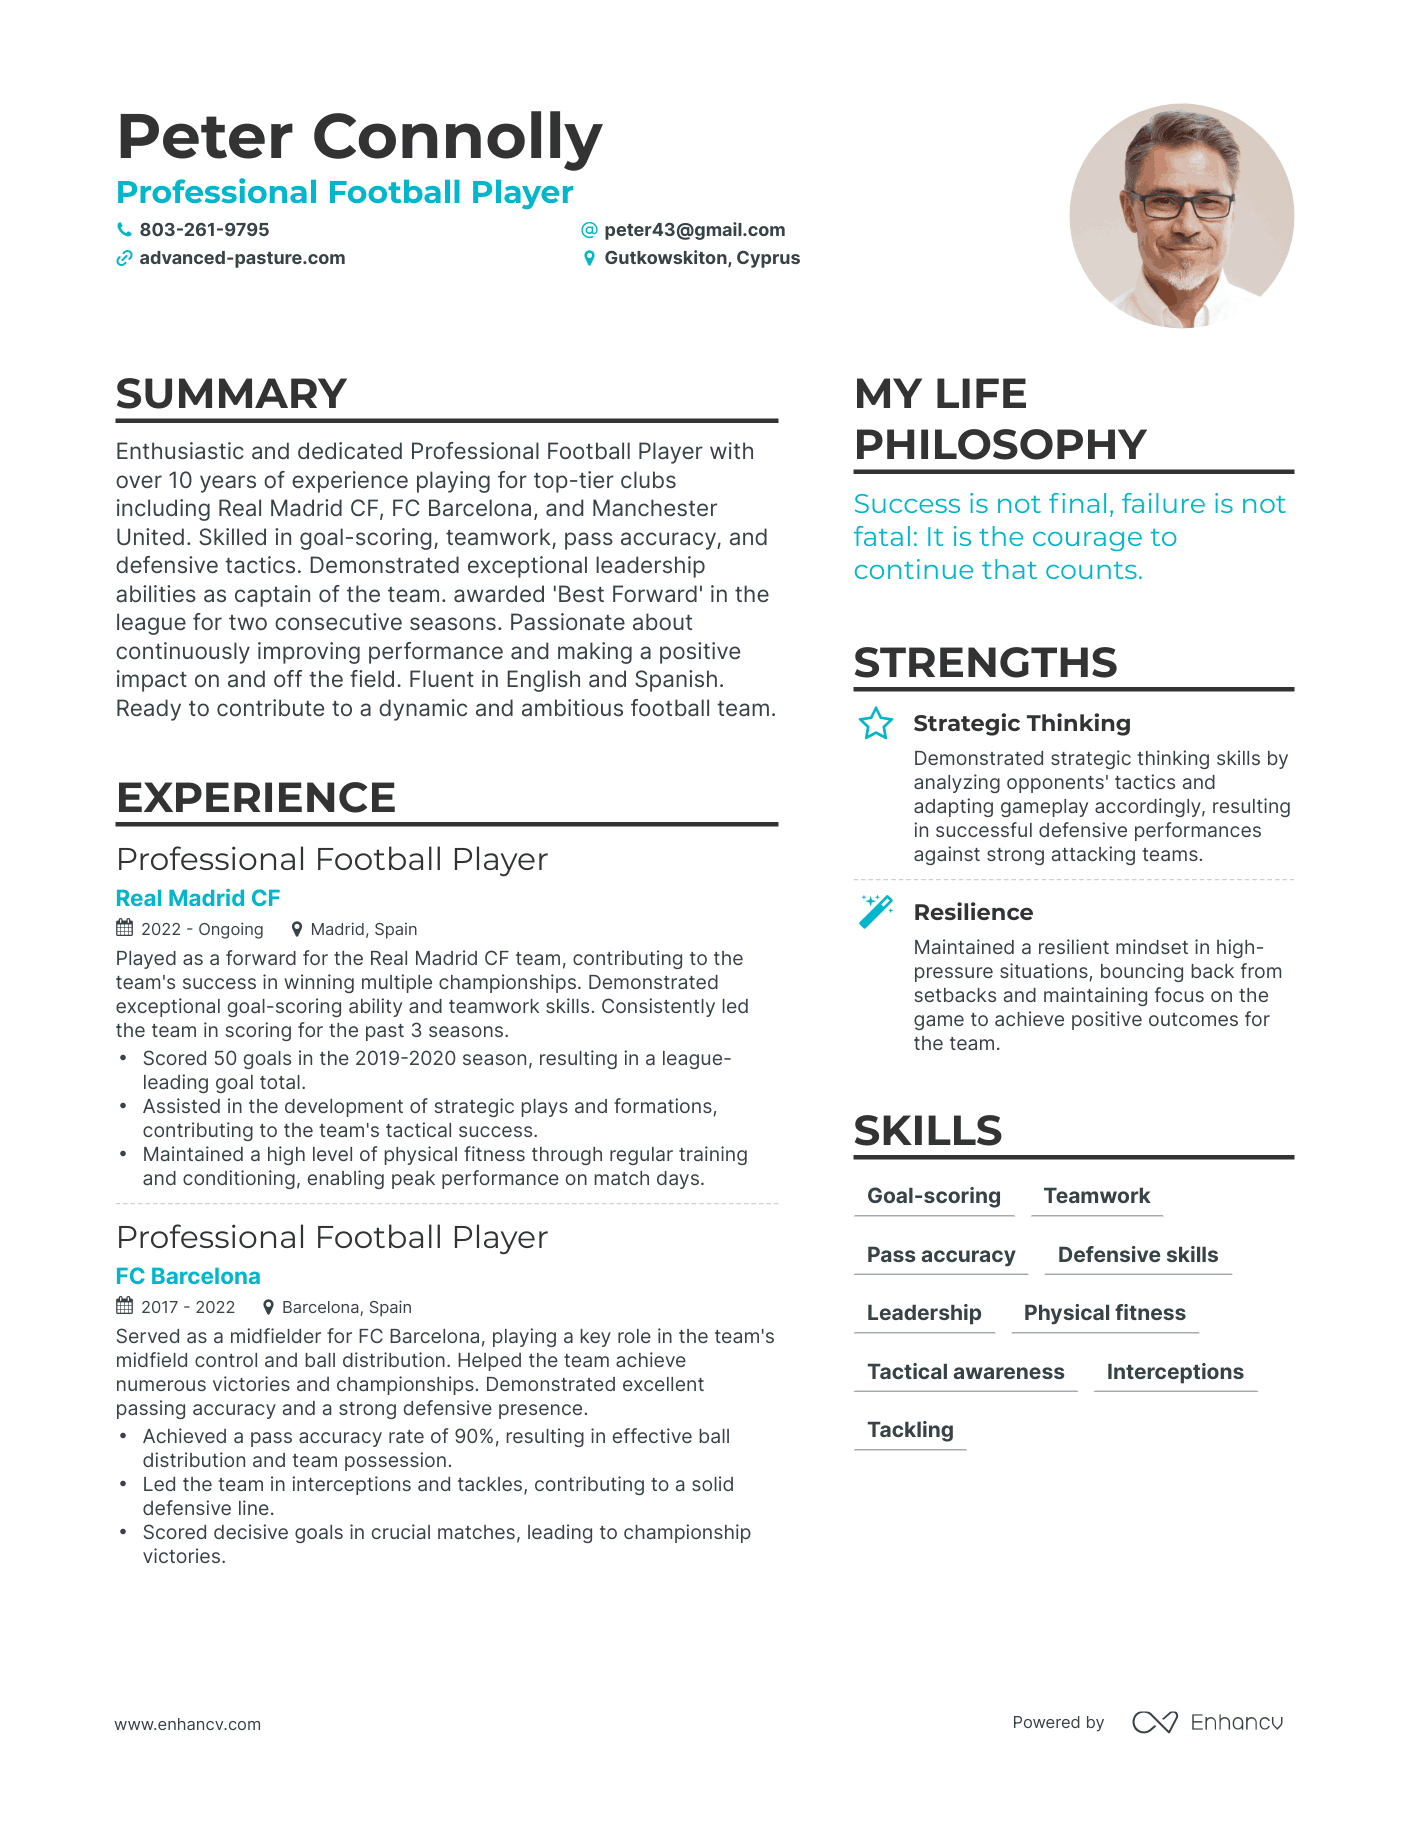 Professional Football Player resume example